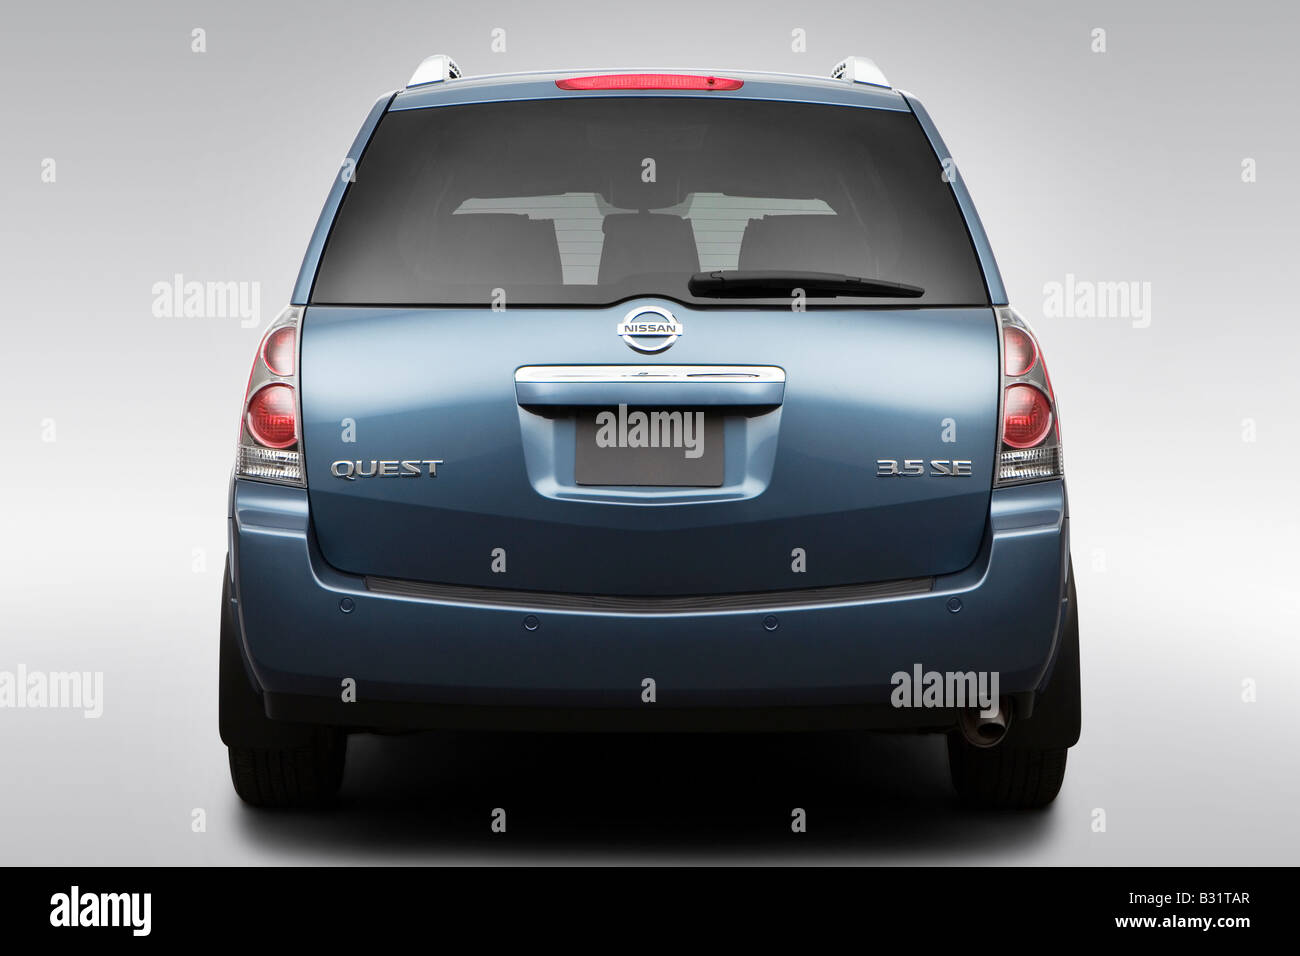 2008 Nissan Quest 3.5 SE in Blue - Engine Stock Photo - Alamy